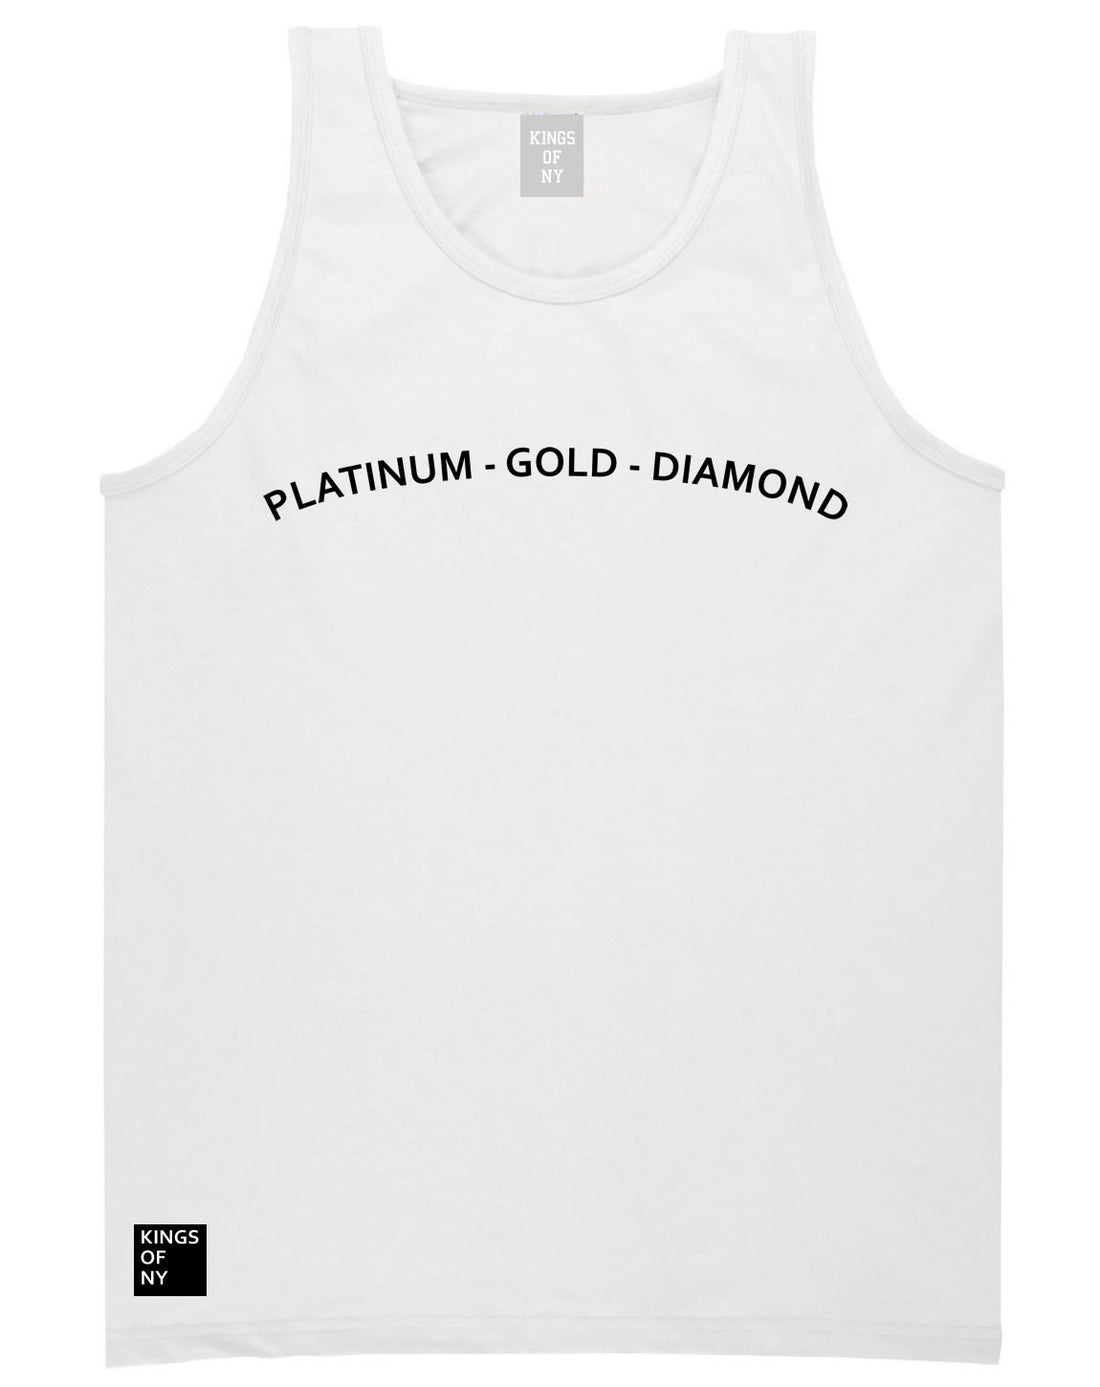 Platinum Gold Diamond Tank Top in White by Kings Of NY